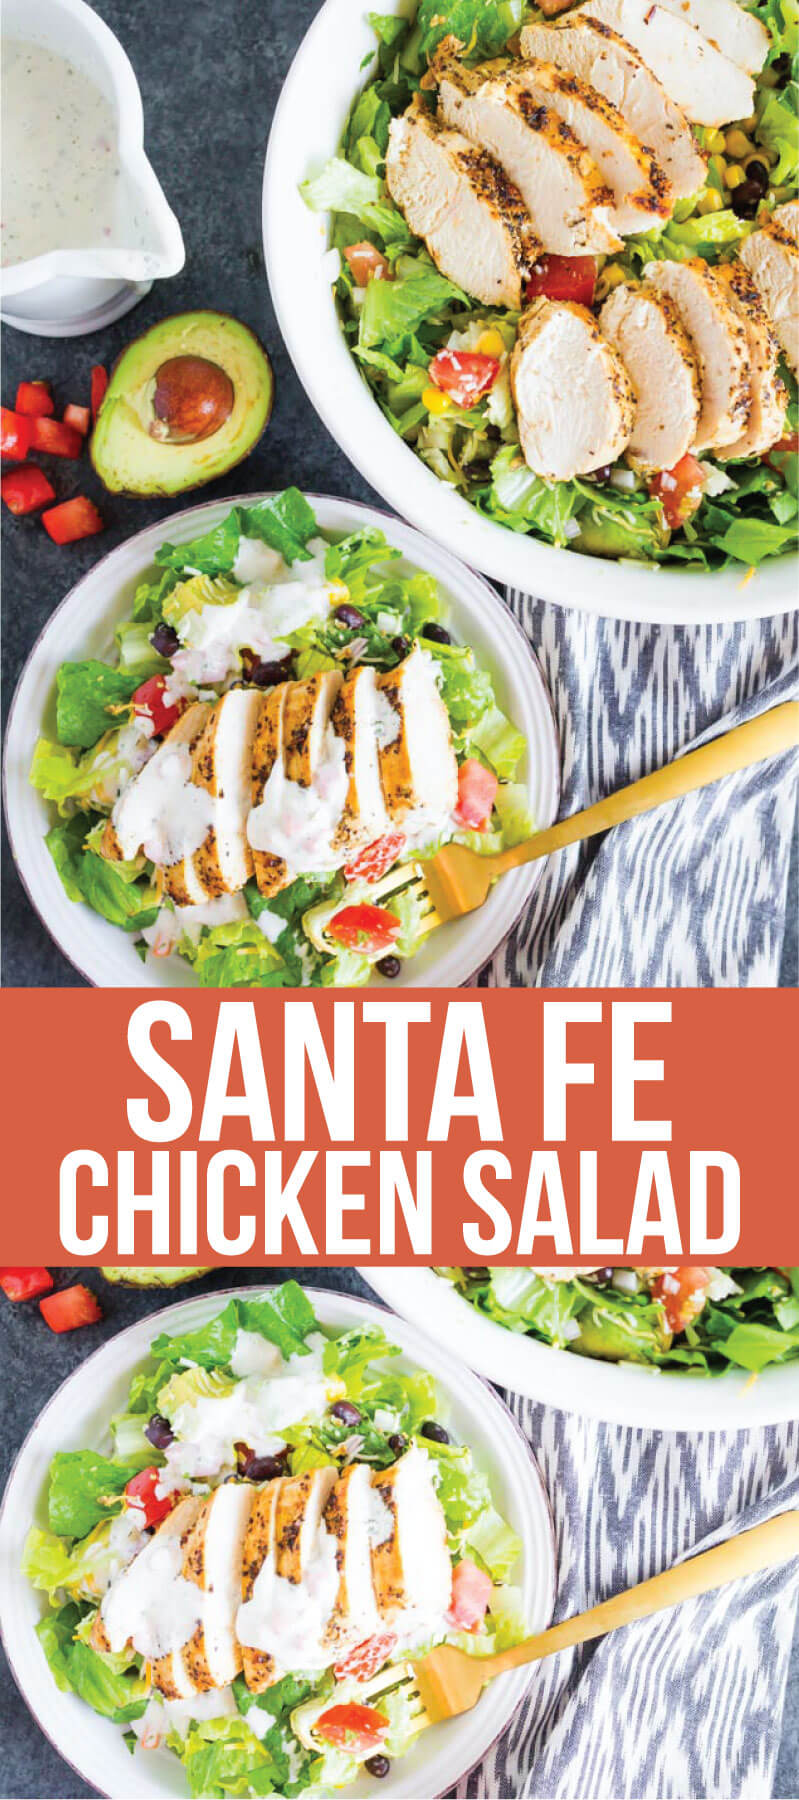 Santa Fe Chicken Salad - a simple, refreshing salad recipe that's perfect for summer! from www.thirtyhandmade.days.com